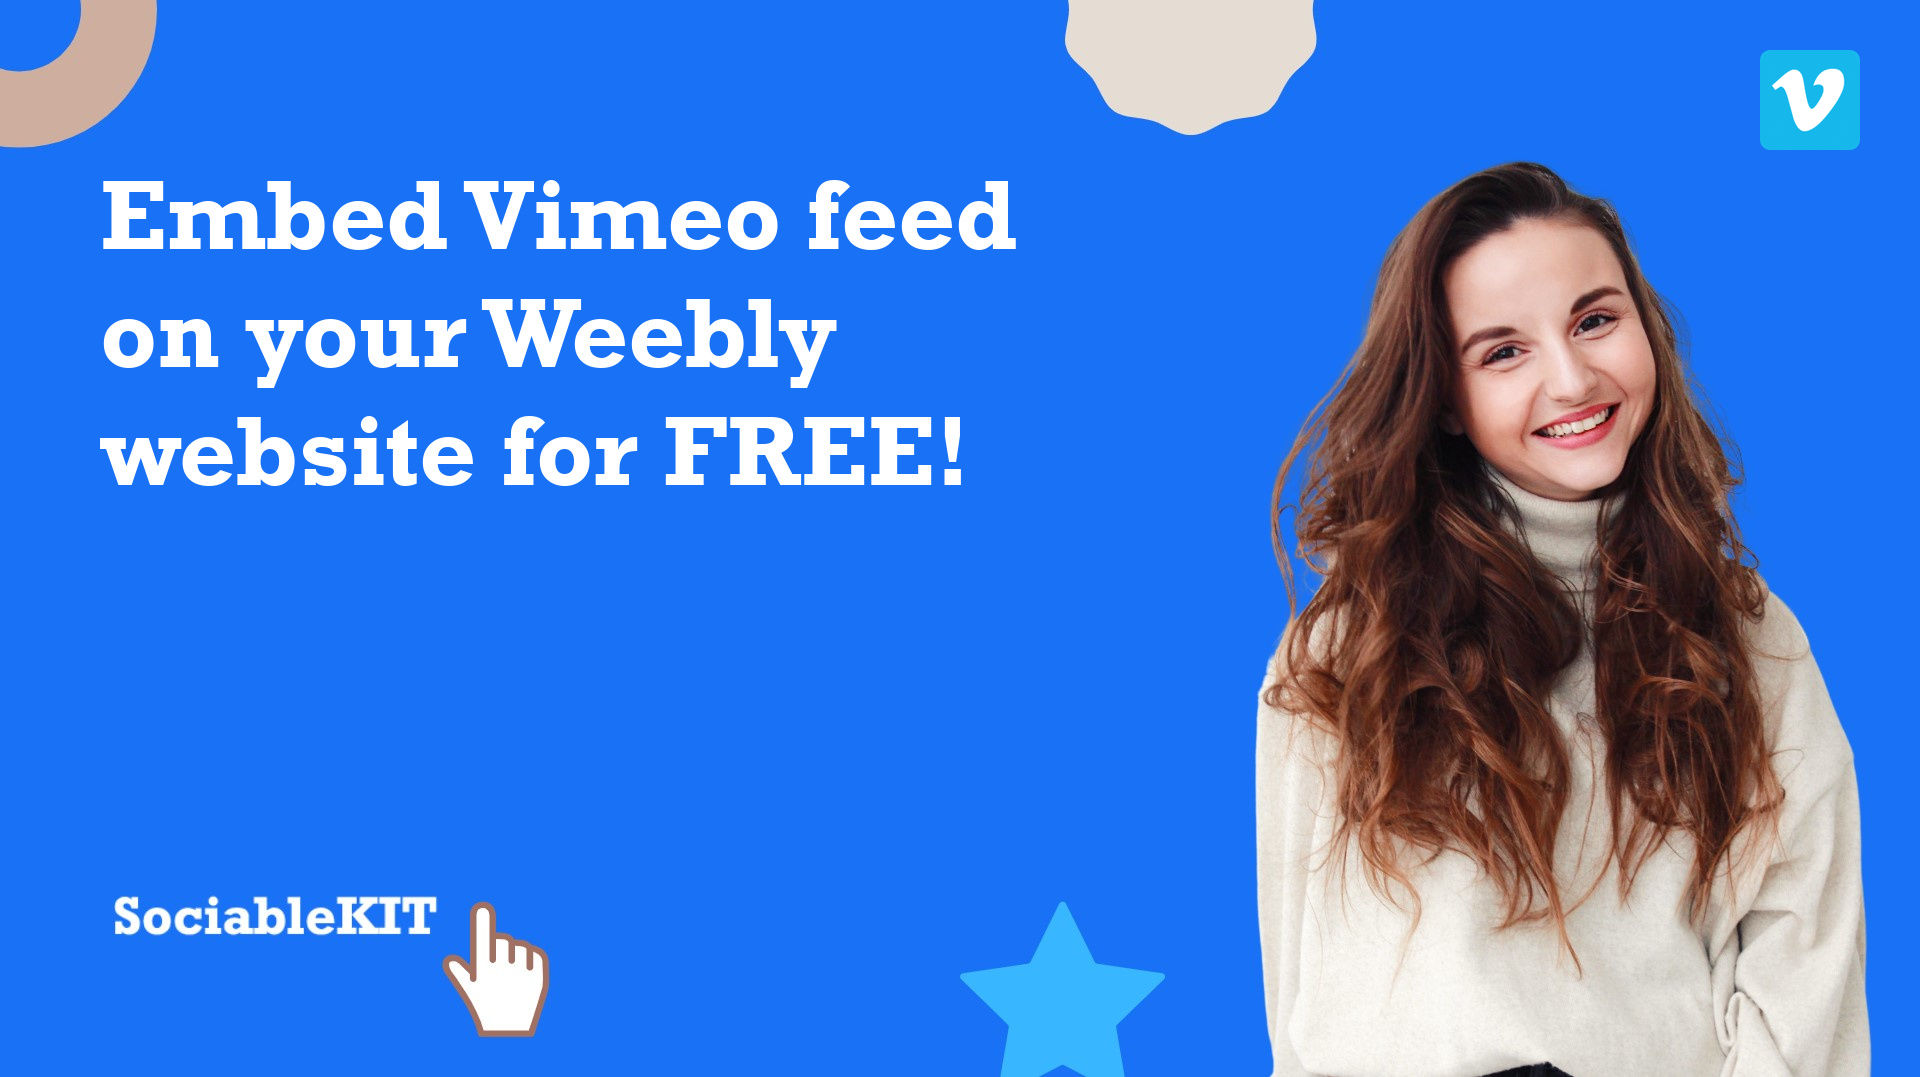 How to embed Vimeo feed on your Weebly website for FREE?